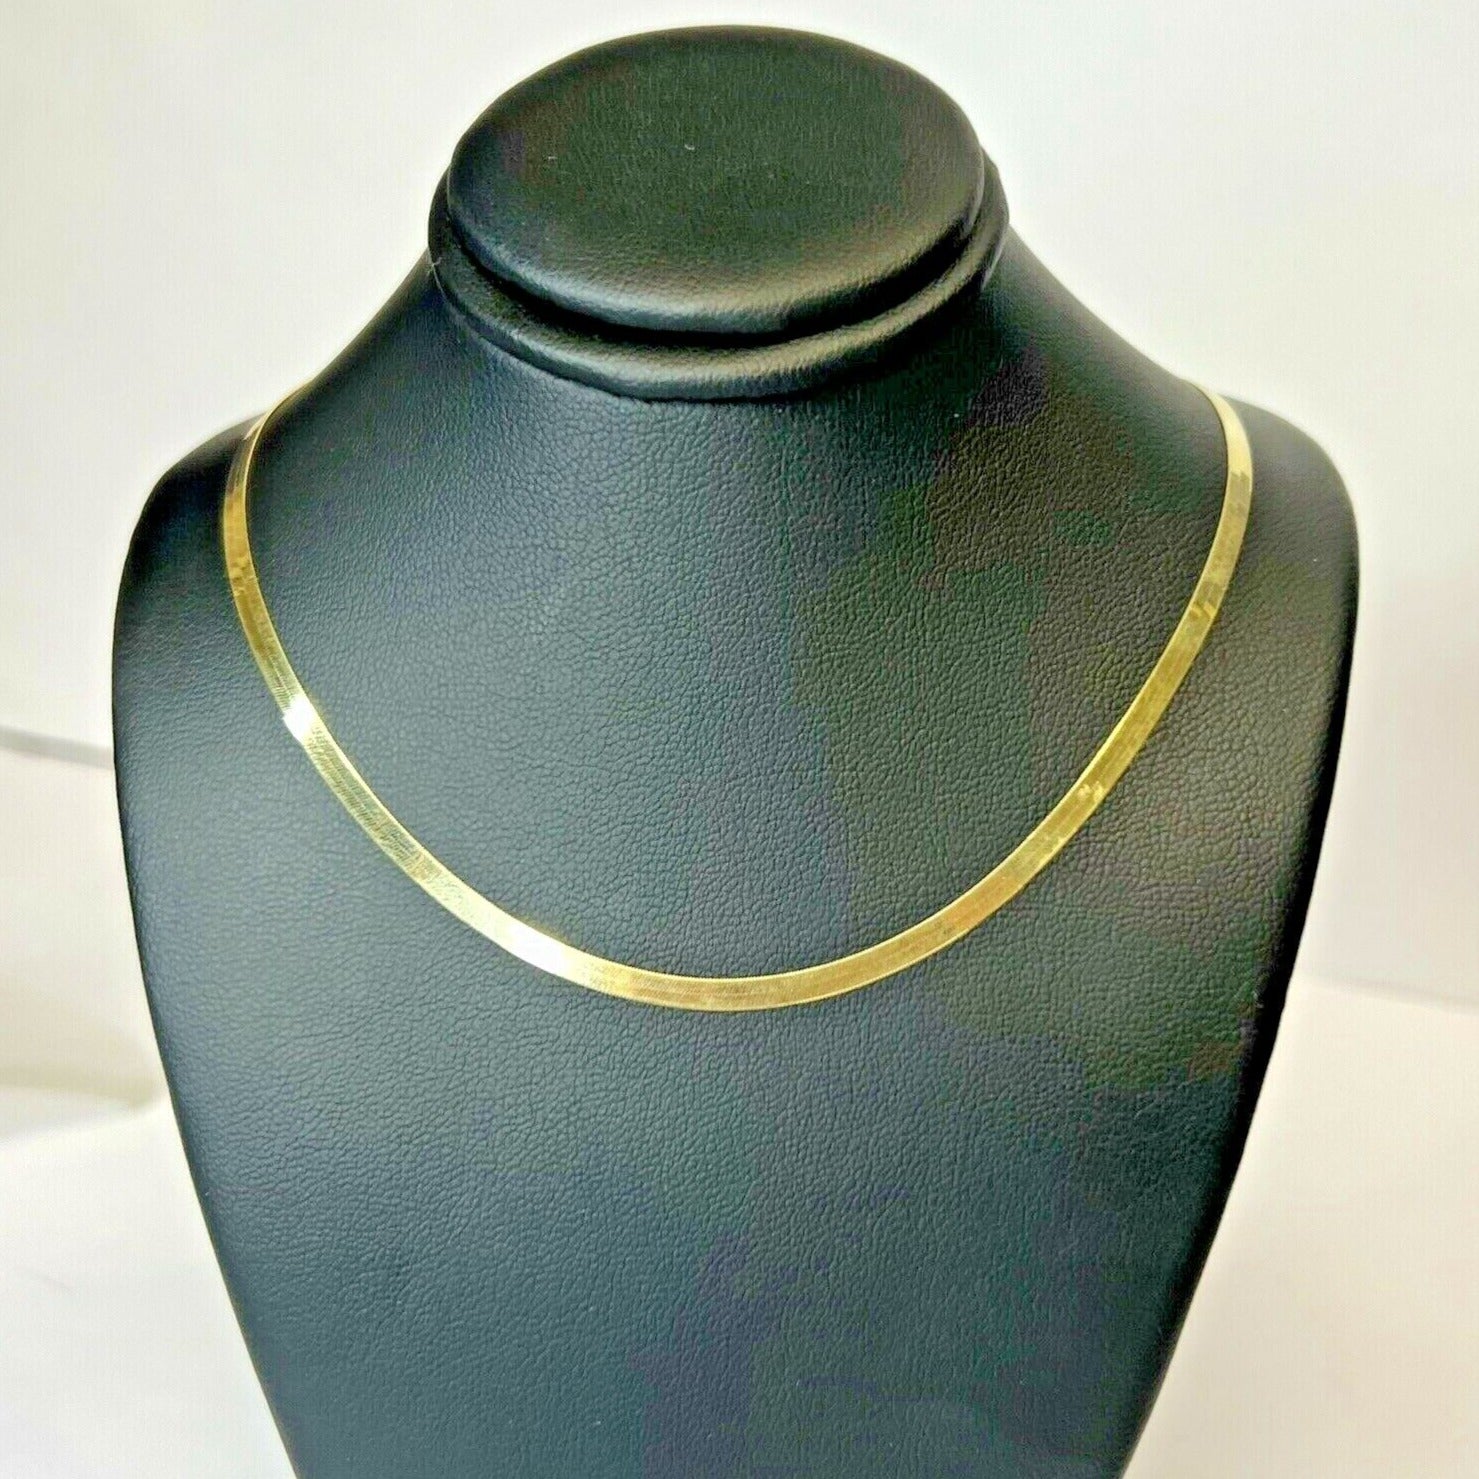 Shimmering 10K Solid Yellow Gold Herringbone 3mm Chain Necklace 18"-20”